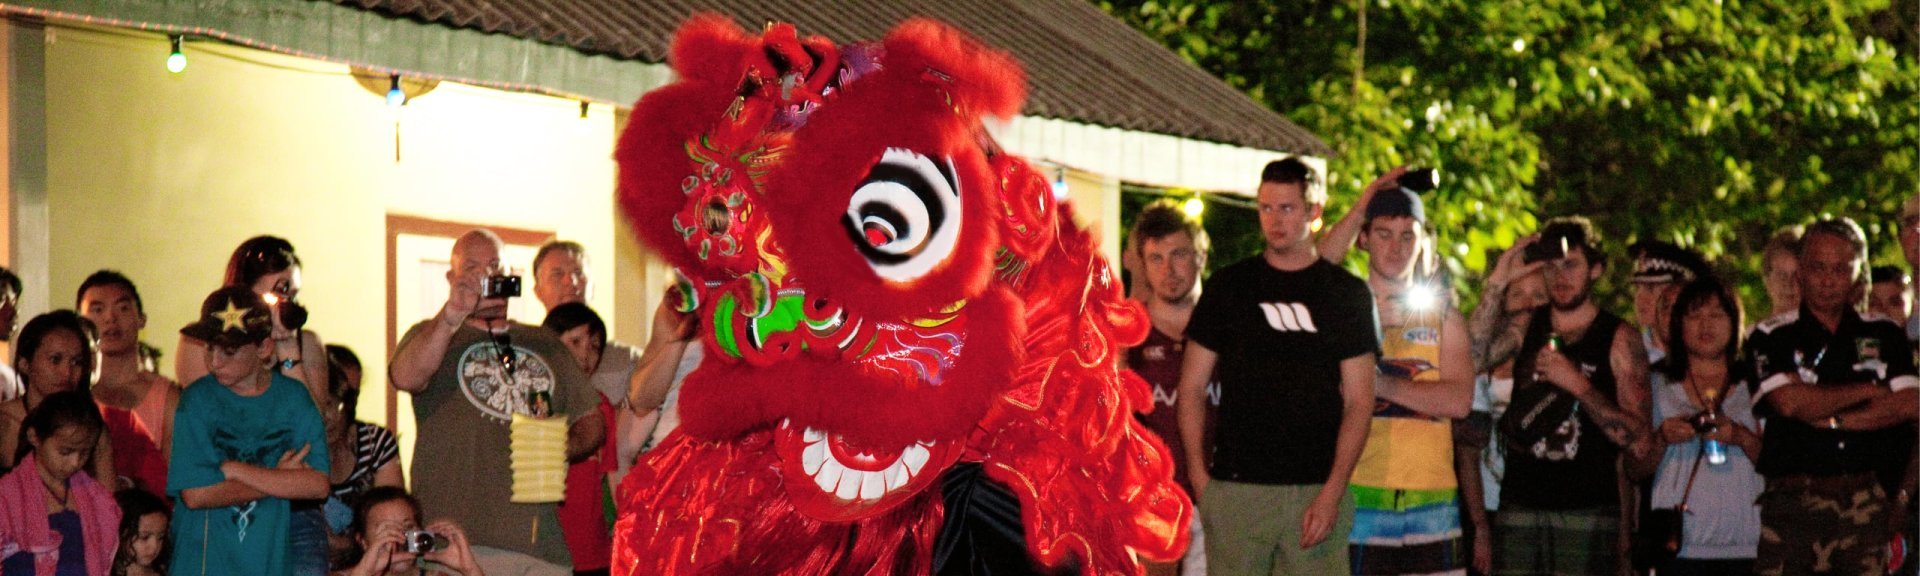 Lion dance during Chinese New Year celebrations. Photo: Alex Cearns / Christmas Island Tourism Association